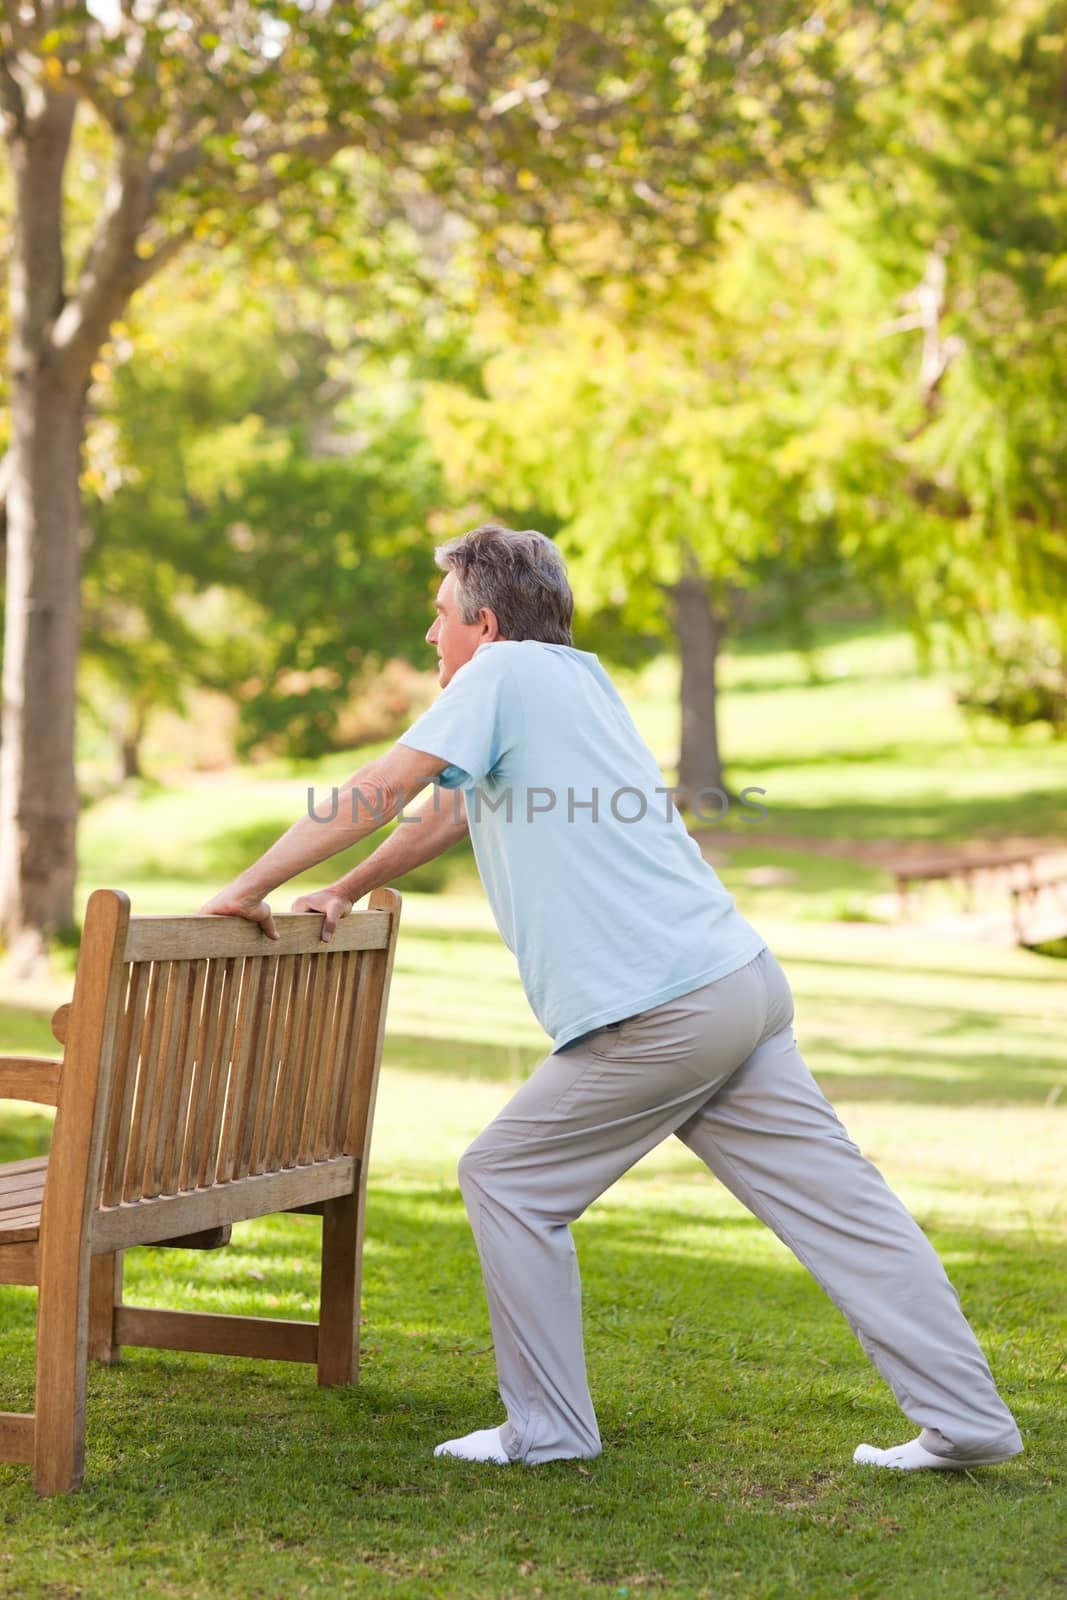 Retired man doing his stretches in the park during the summer